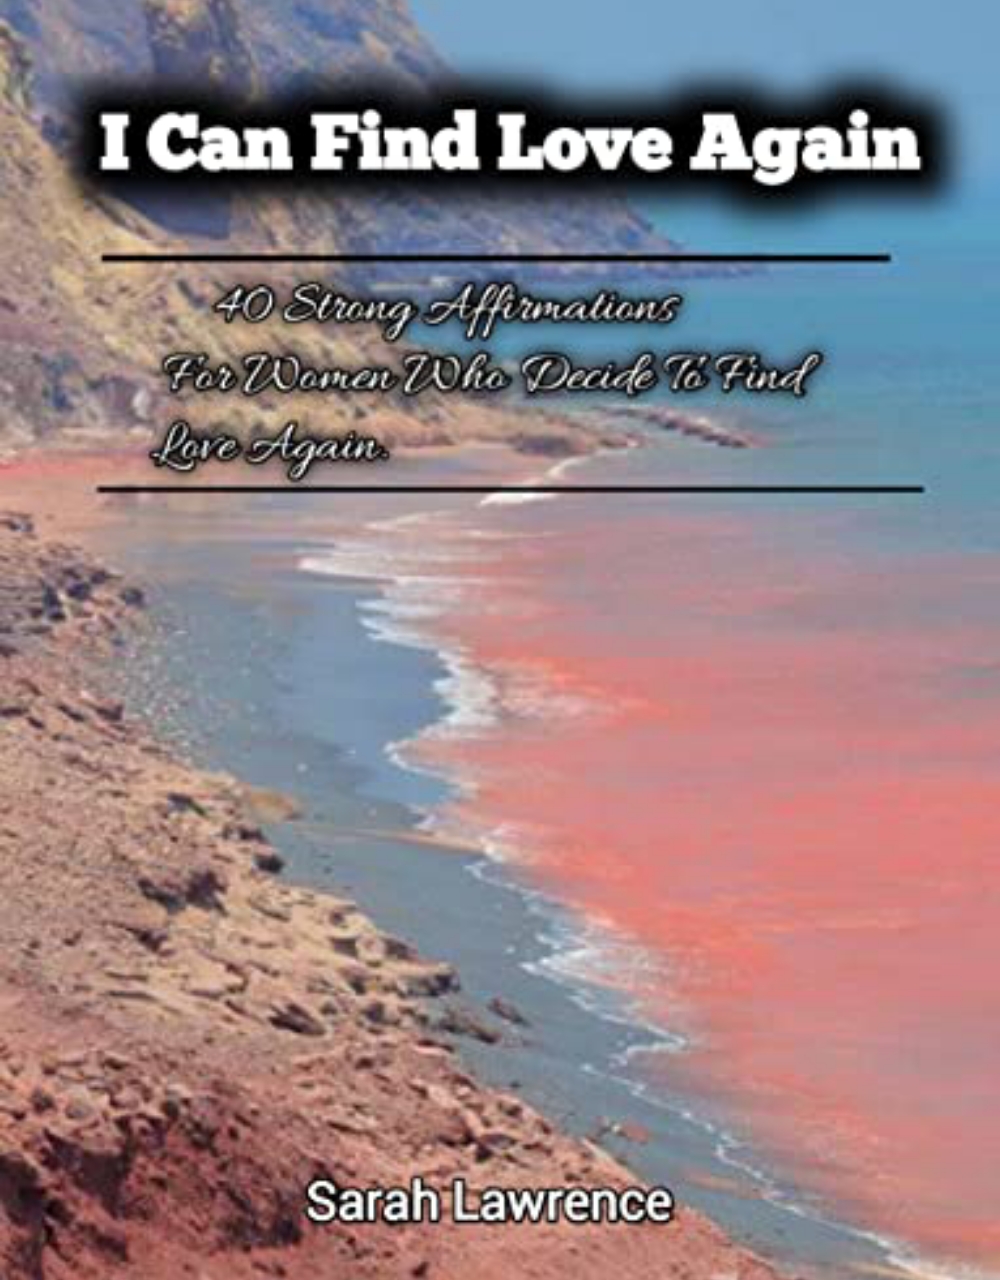 FREE: I Can Find Love Again: 40 strong Affirmations for women who decide to find love again by Sarah Lawrence